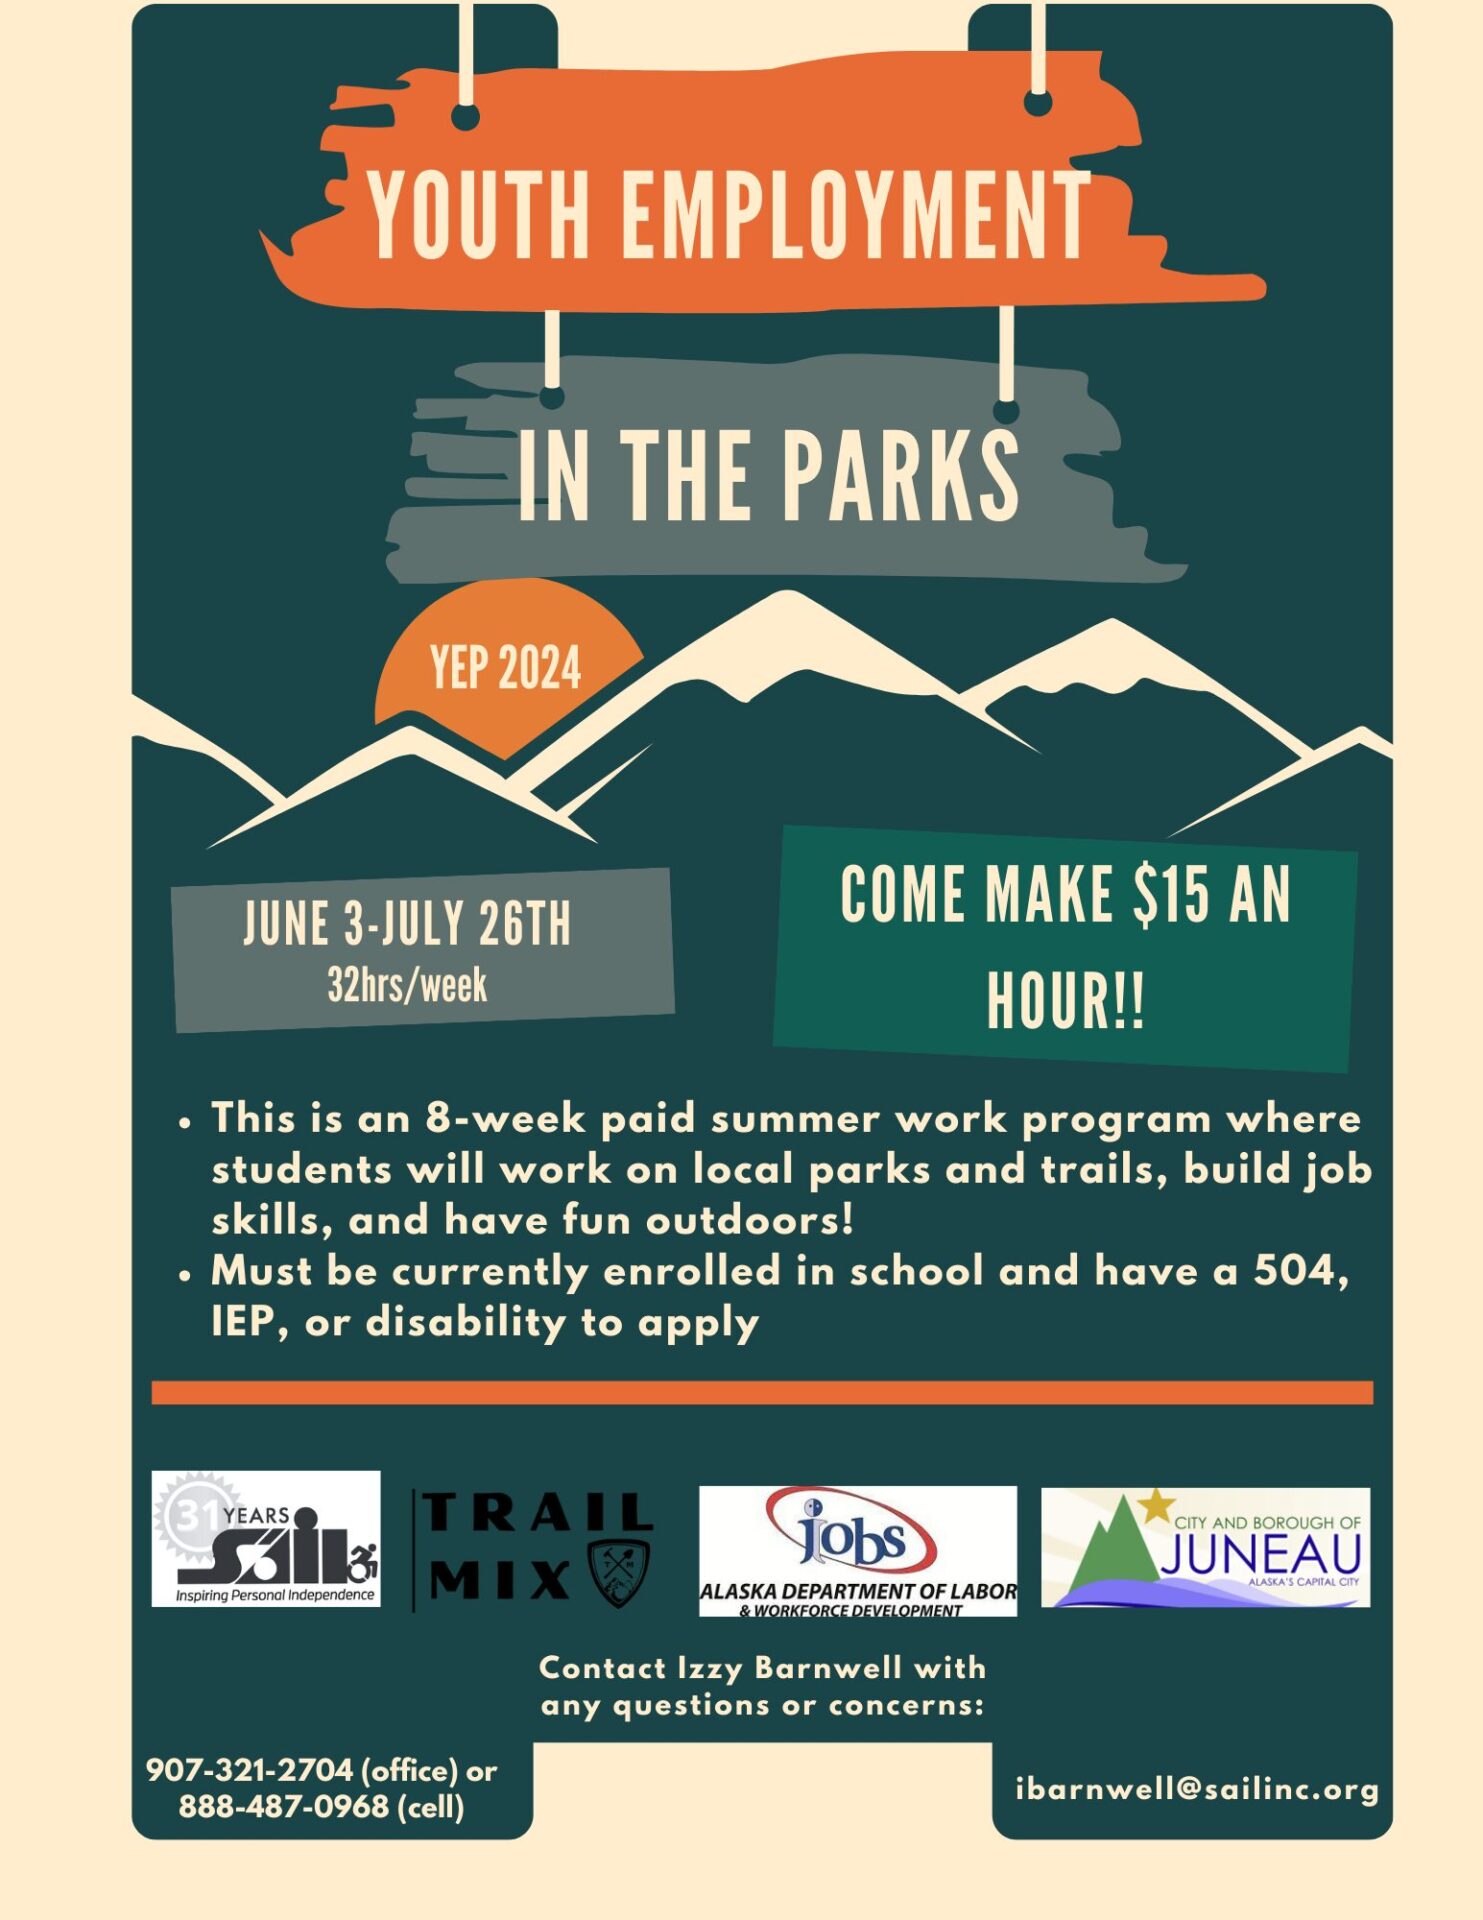 Juneau's Youth Employment in the Parks starts June 3-July 26. Call Izzy Barnwell at 907. 321. 2704. Click on the poster and complete and submit the application to apply. 